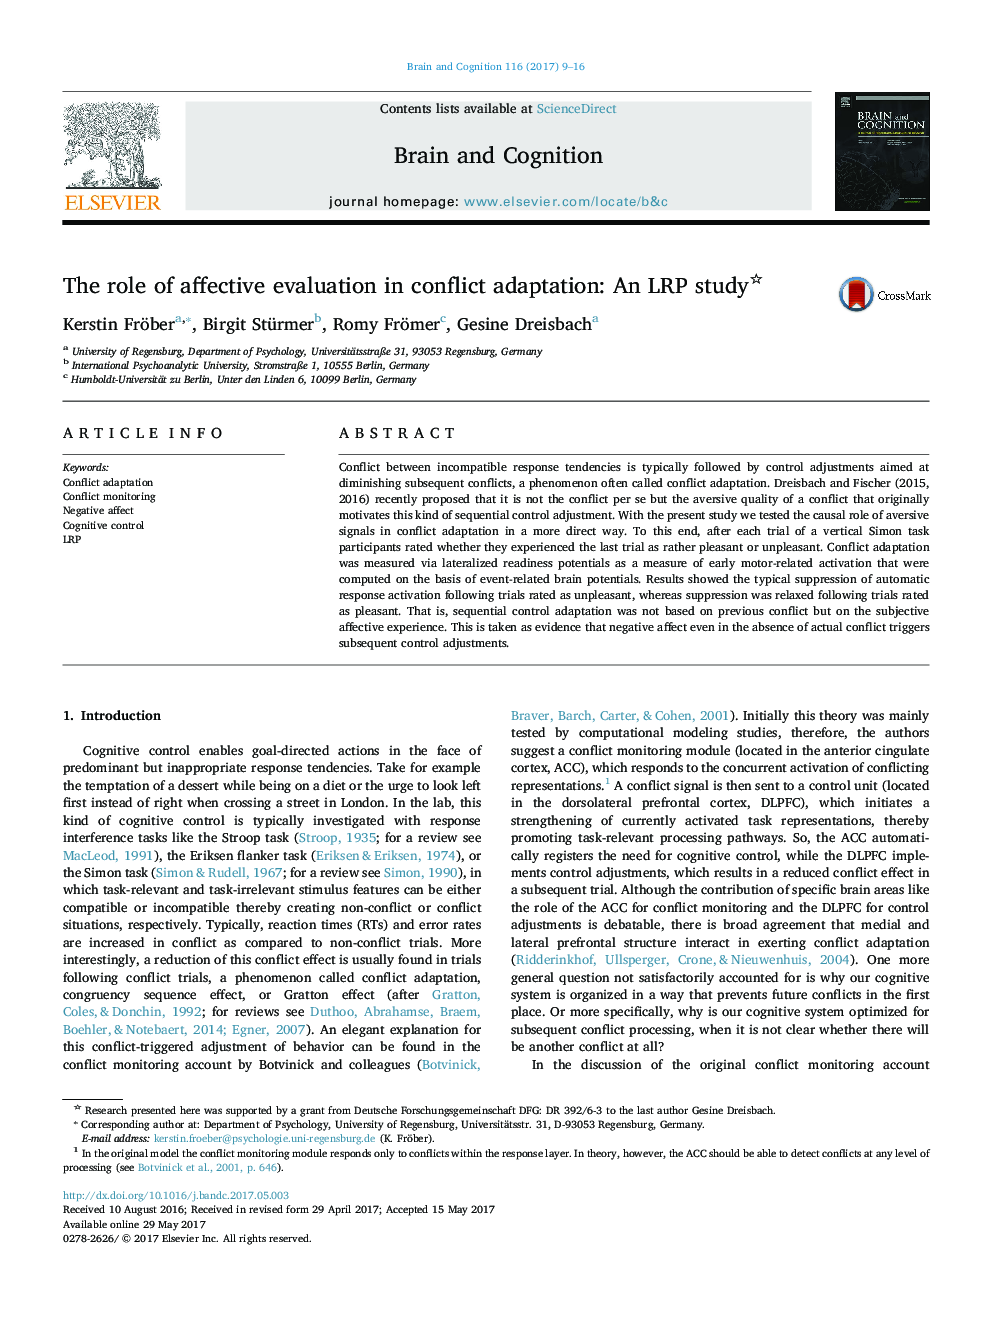 The role of affective evaluation in conflict adaptation: An LRP study